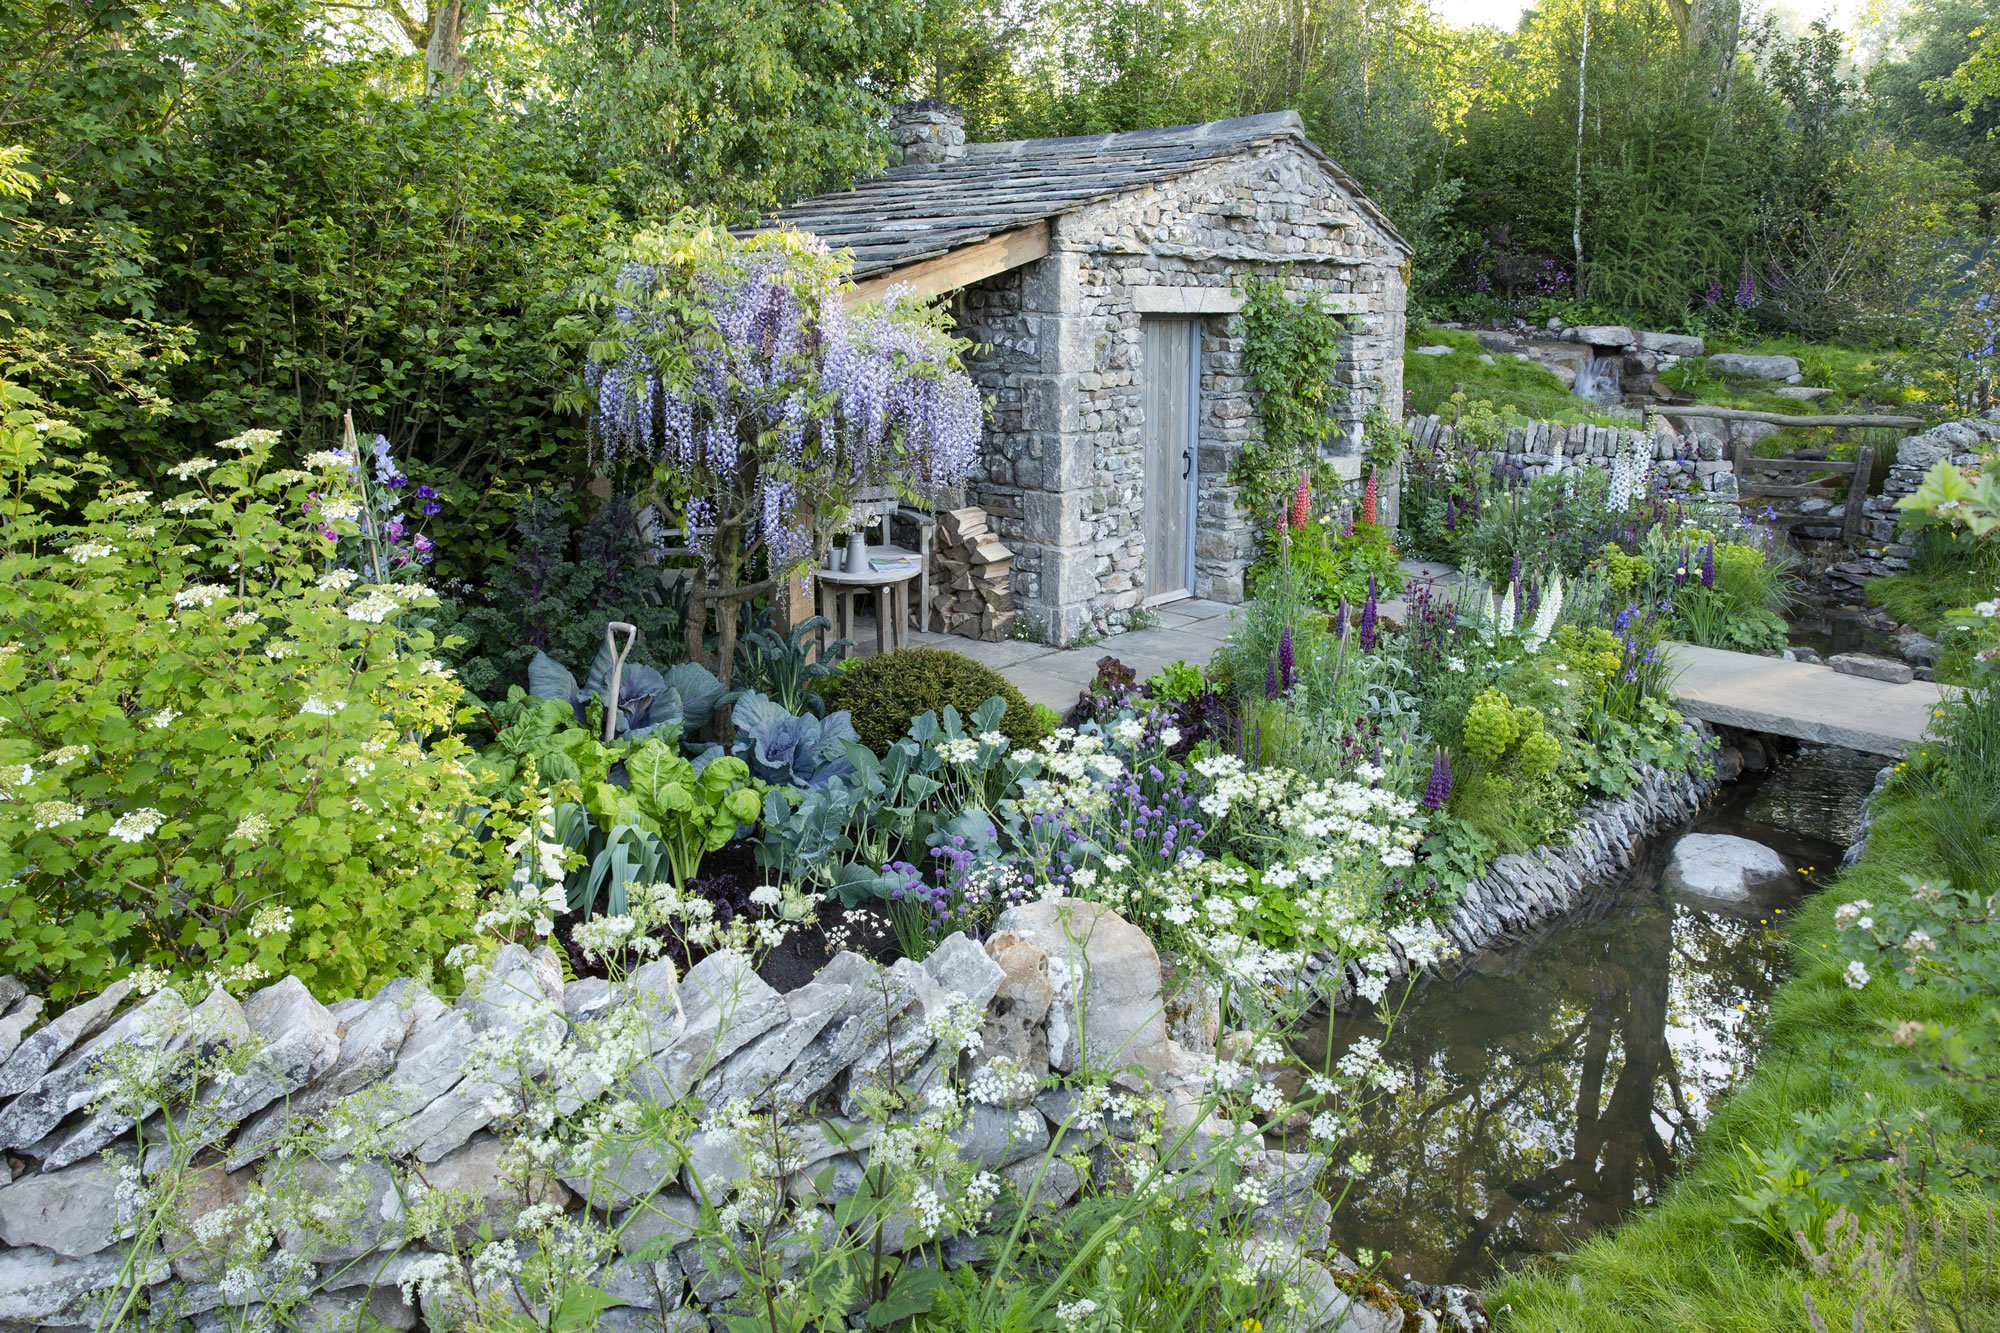 Image name wtylandformchelsea19 1 the 7 image from the post <strong>Welcome to Yorkshire Chelsea Garden Wins BBC RHS People’s Choice Award as Garden of the Decade </strong> in Yorkshire.com.